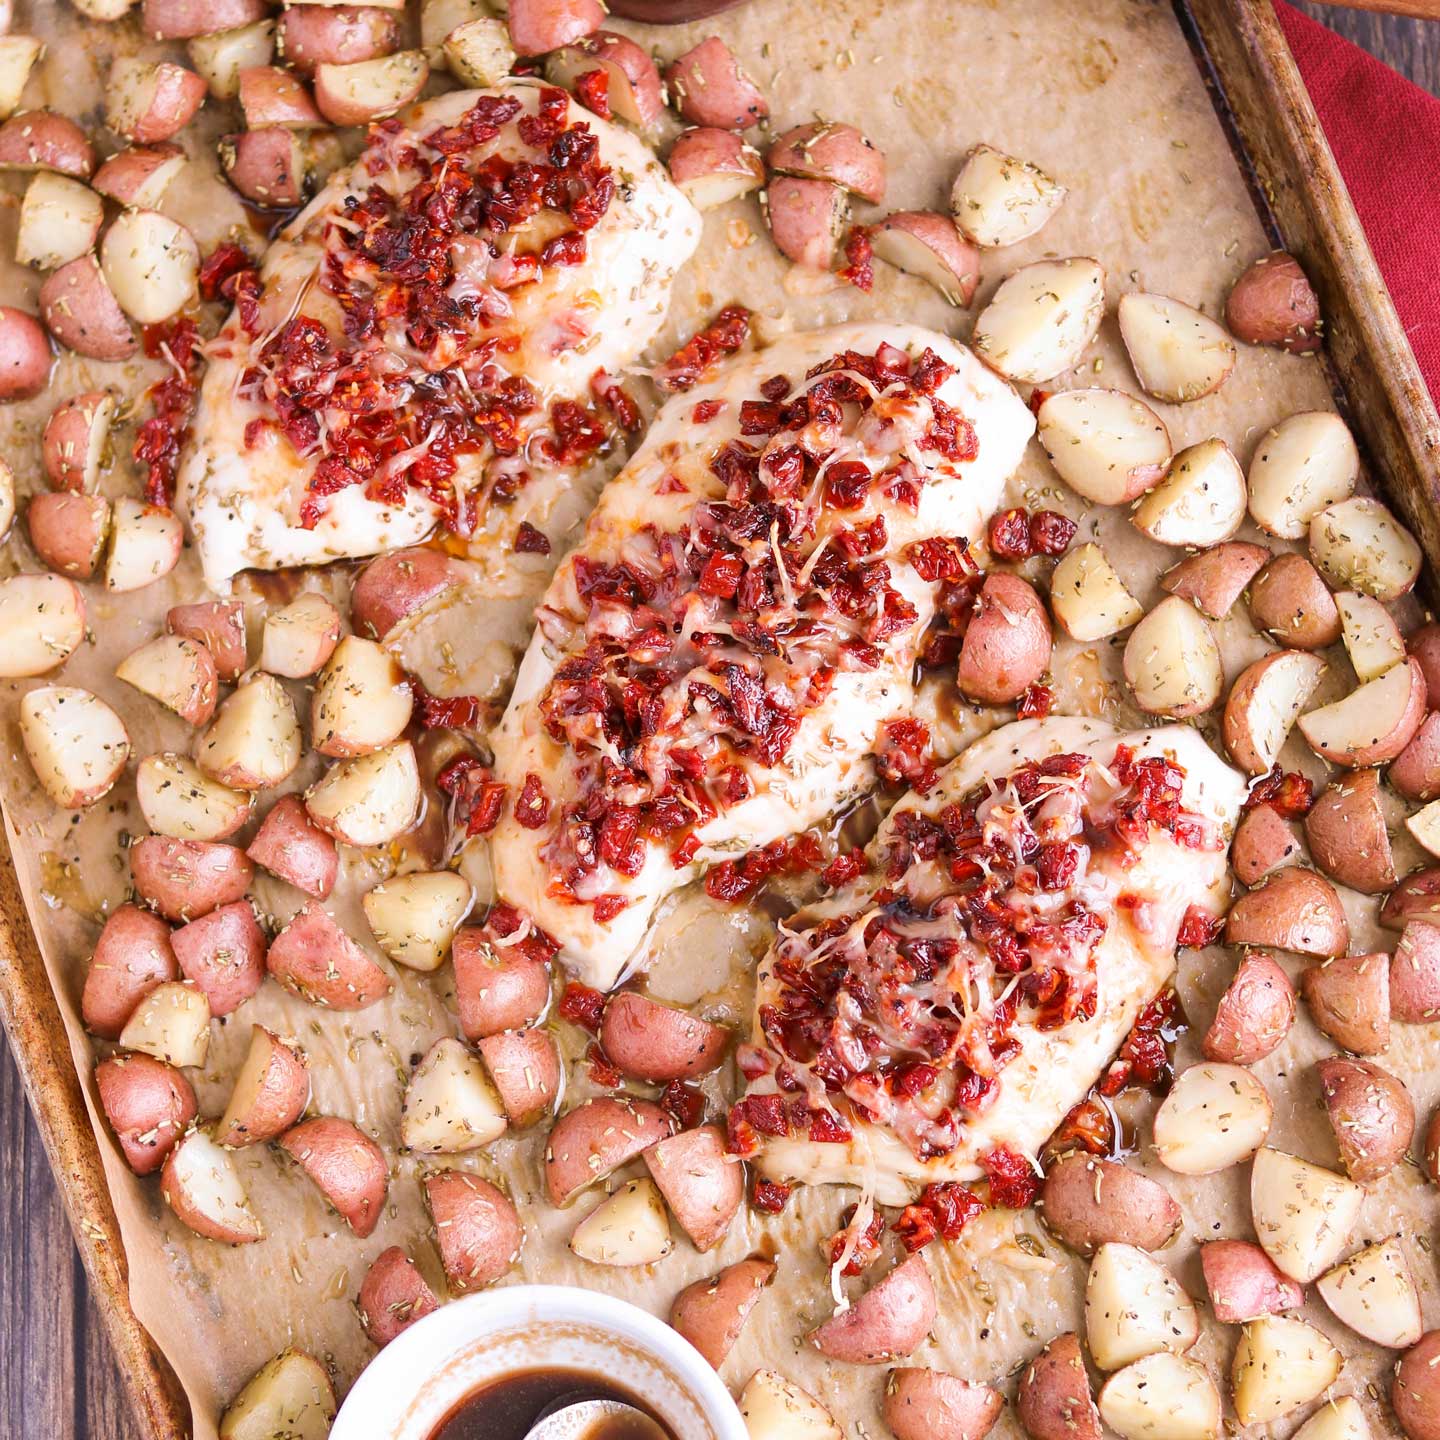 Incredibly delicious, with such easy cleanup! This sheet pan chicken dinner recipe features tender, juicy chicken breasts and perfectly baked redskin potatoes. All accented with rosemary, crowned with a scrumptious topping of sun-dried tomatoes and Italian cheeses, then finished with a honey-balsamic drizzle! This sheet pan supper recipe takes chicken and potatoes to a whole new level! Easy enough for weeknight dinners (make-ahead tips!), special enough for company! | www.TwoHealthyKitchens.com